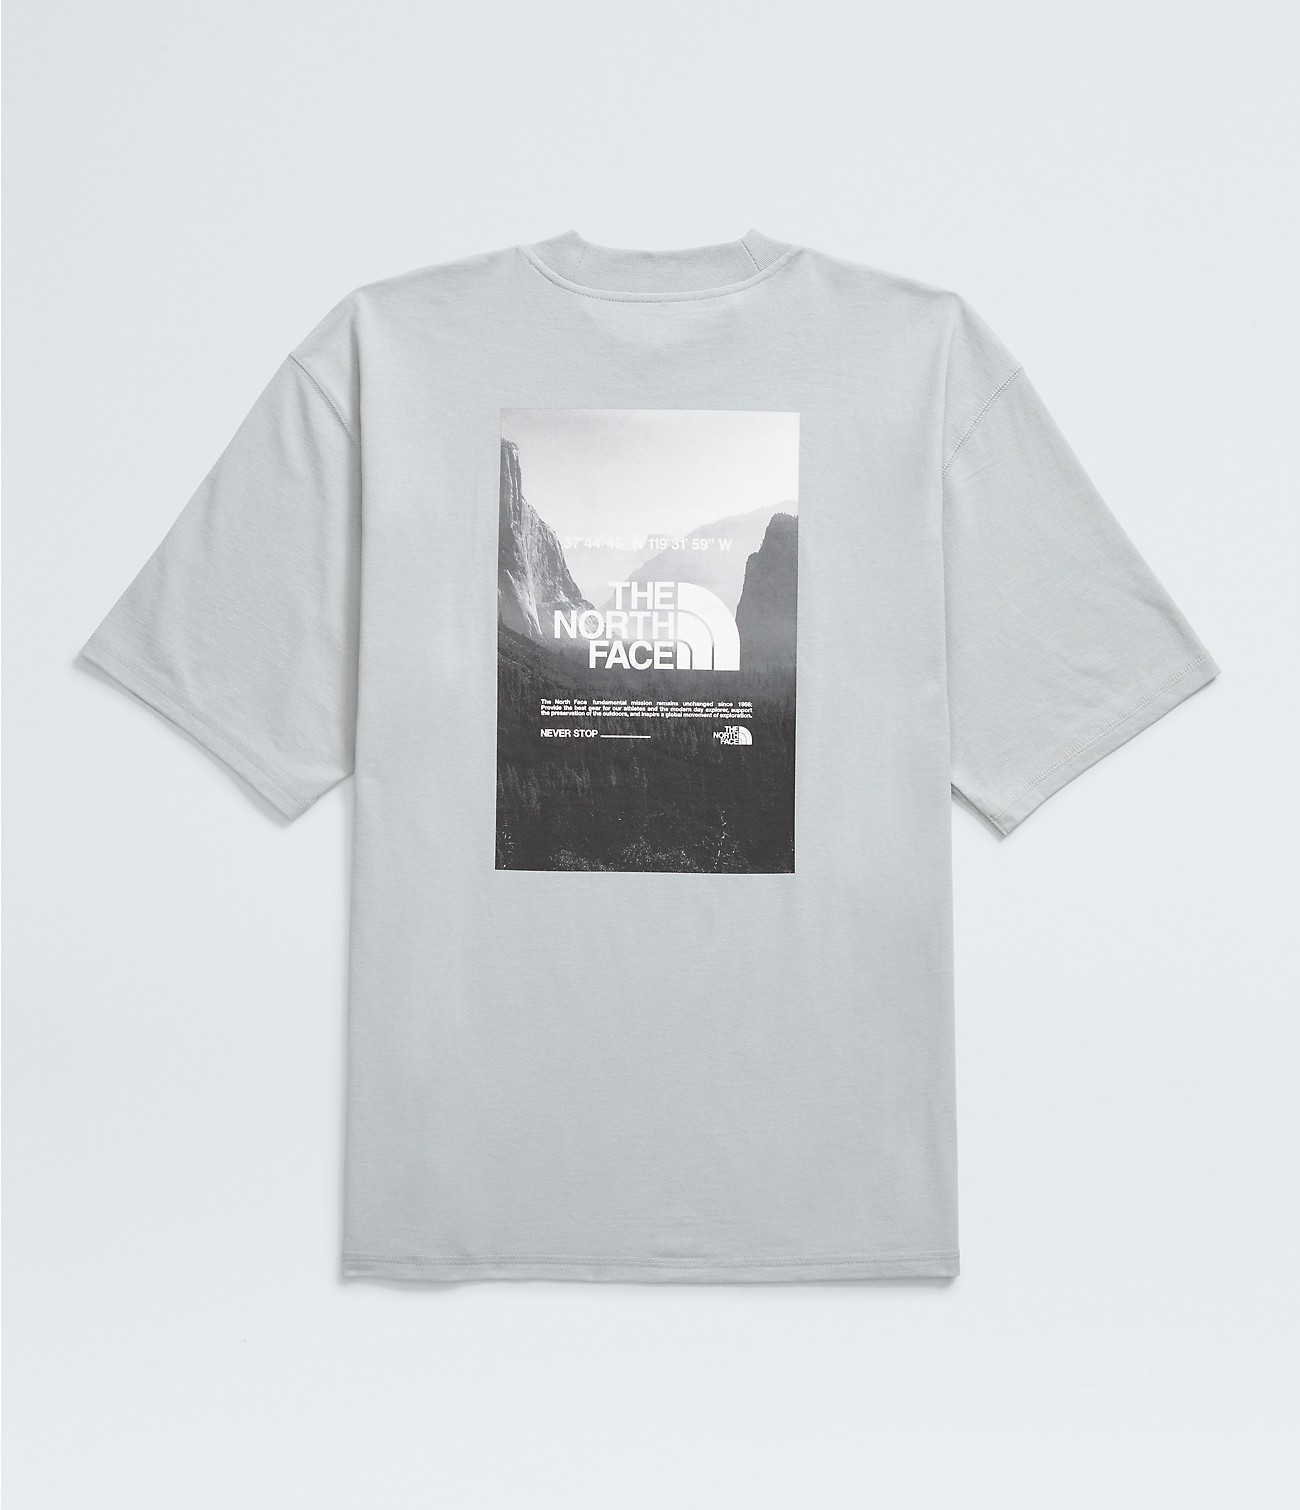 Men’s Short-Sleeve AXYS Tee | The North Face